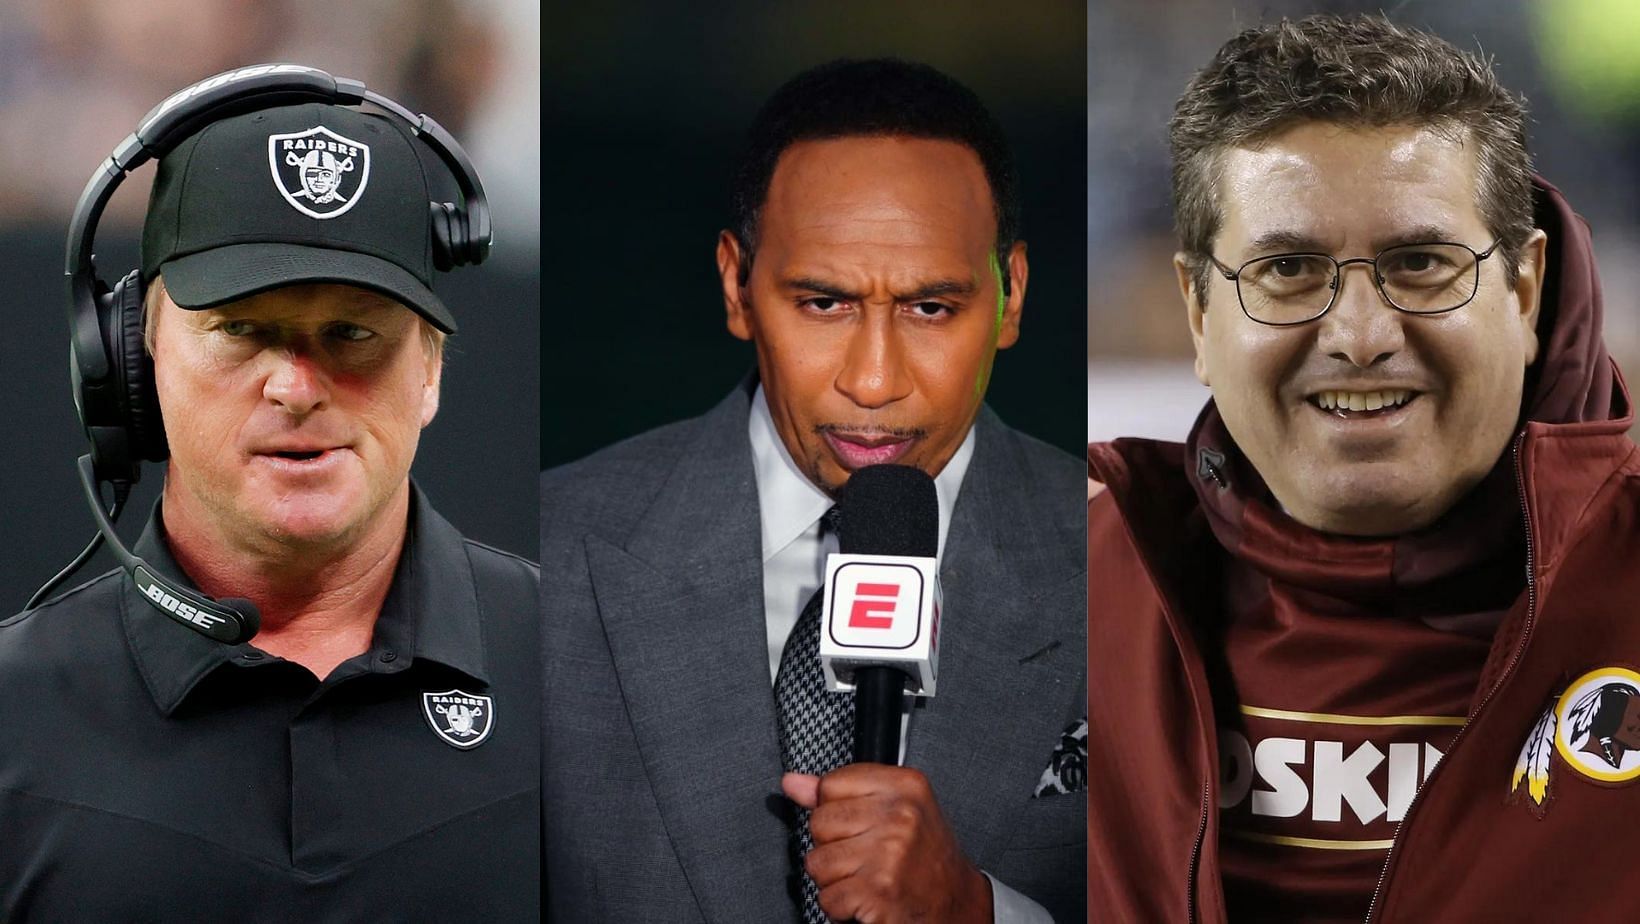 Did Dan Snyder leaked the emails that ended Jon Gruden